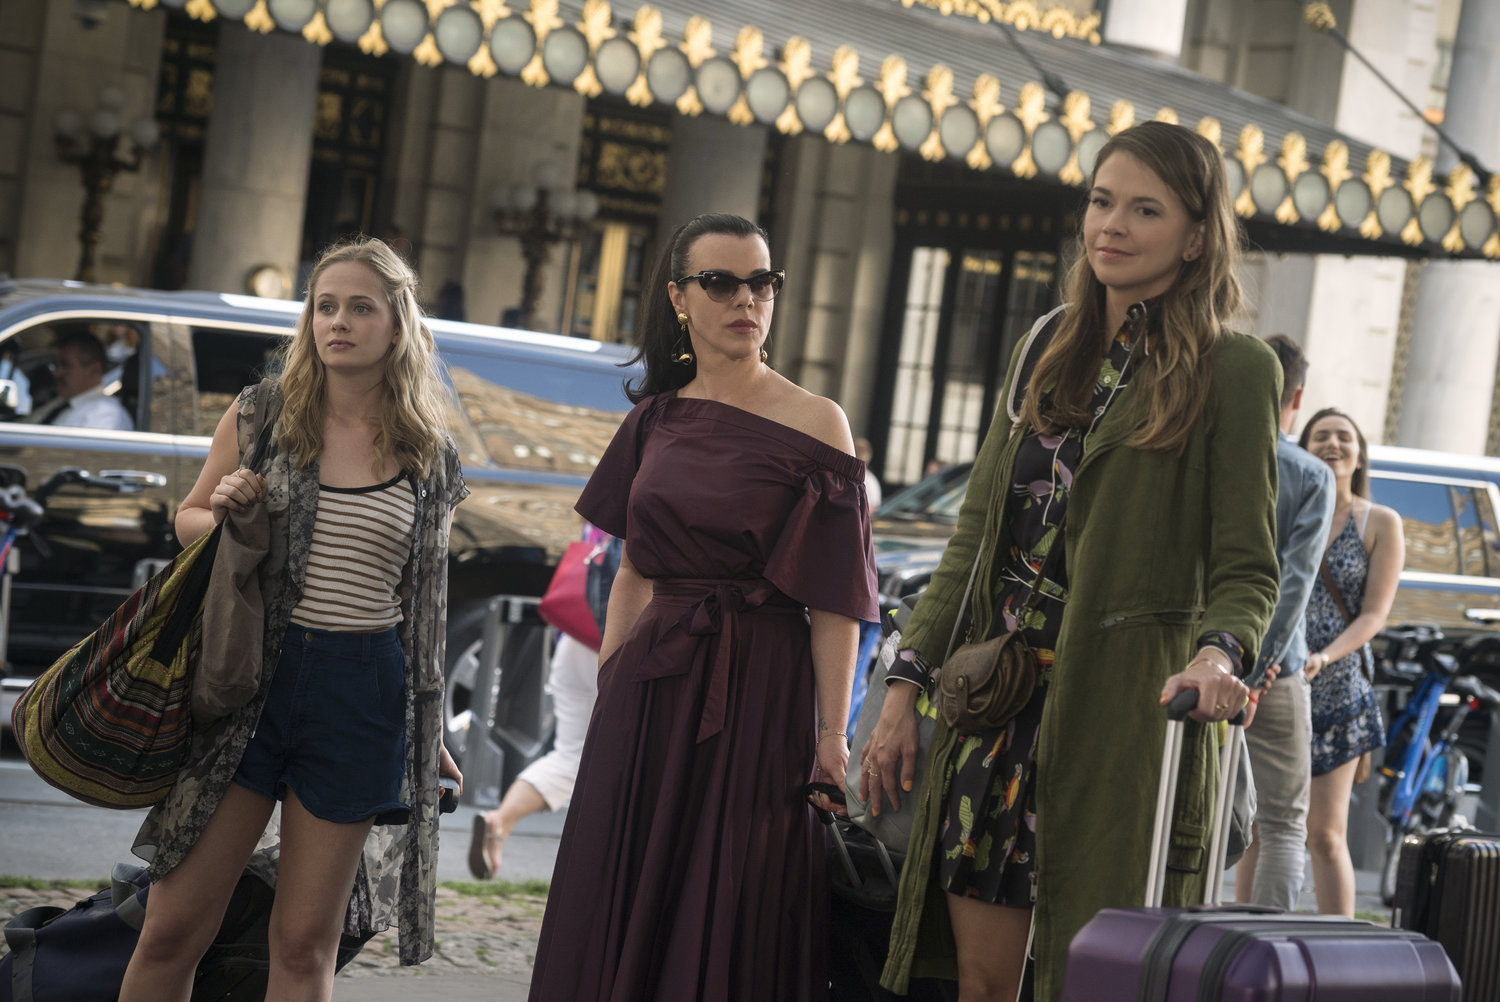 Sutton Foster and Debi Mazar on Younger